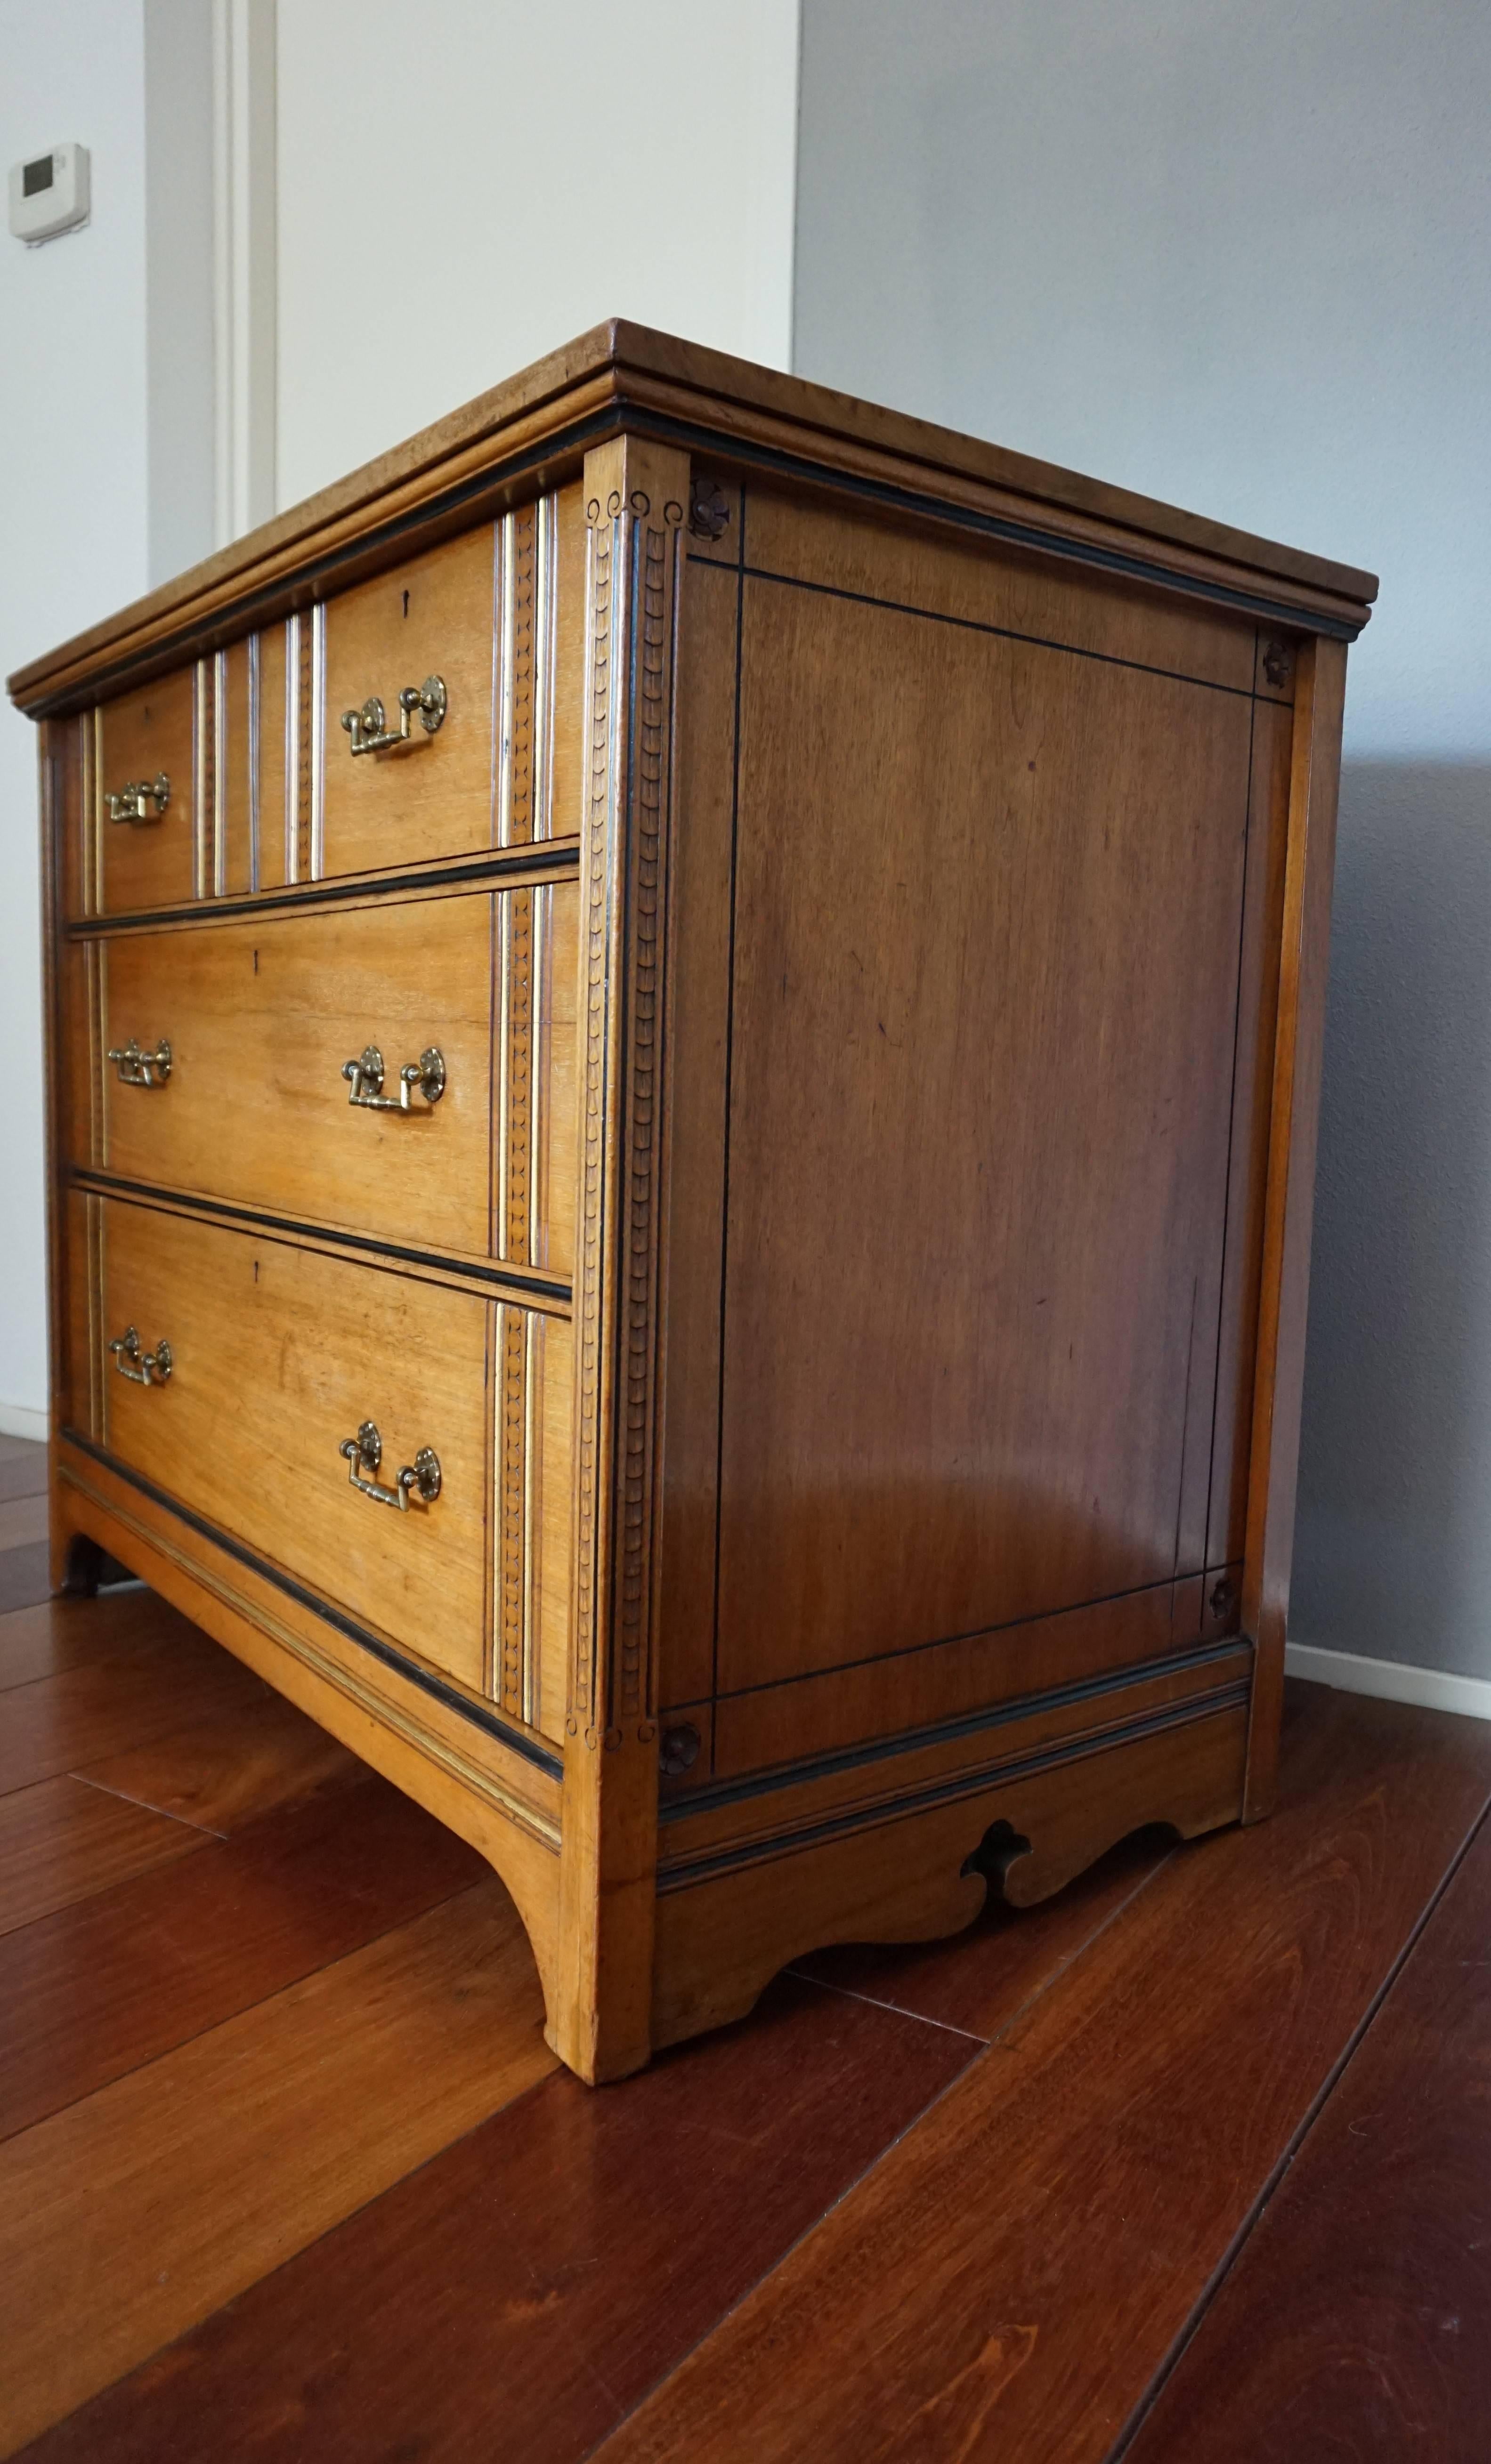 Majestic Gillow of Lancaster chest of drawers.

This wonderfully designed, hand-carved, gilt and ebonized nutwood chest of drawers is not in the style of, not almost certainly by, not after, not in the manner of, nor is it attributed to Gillow it is